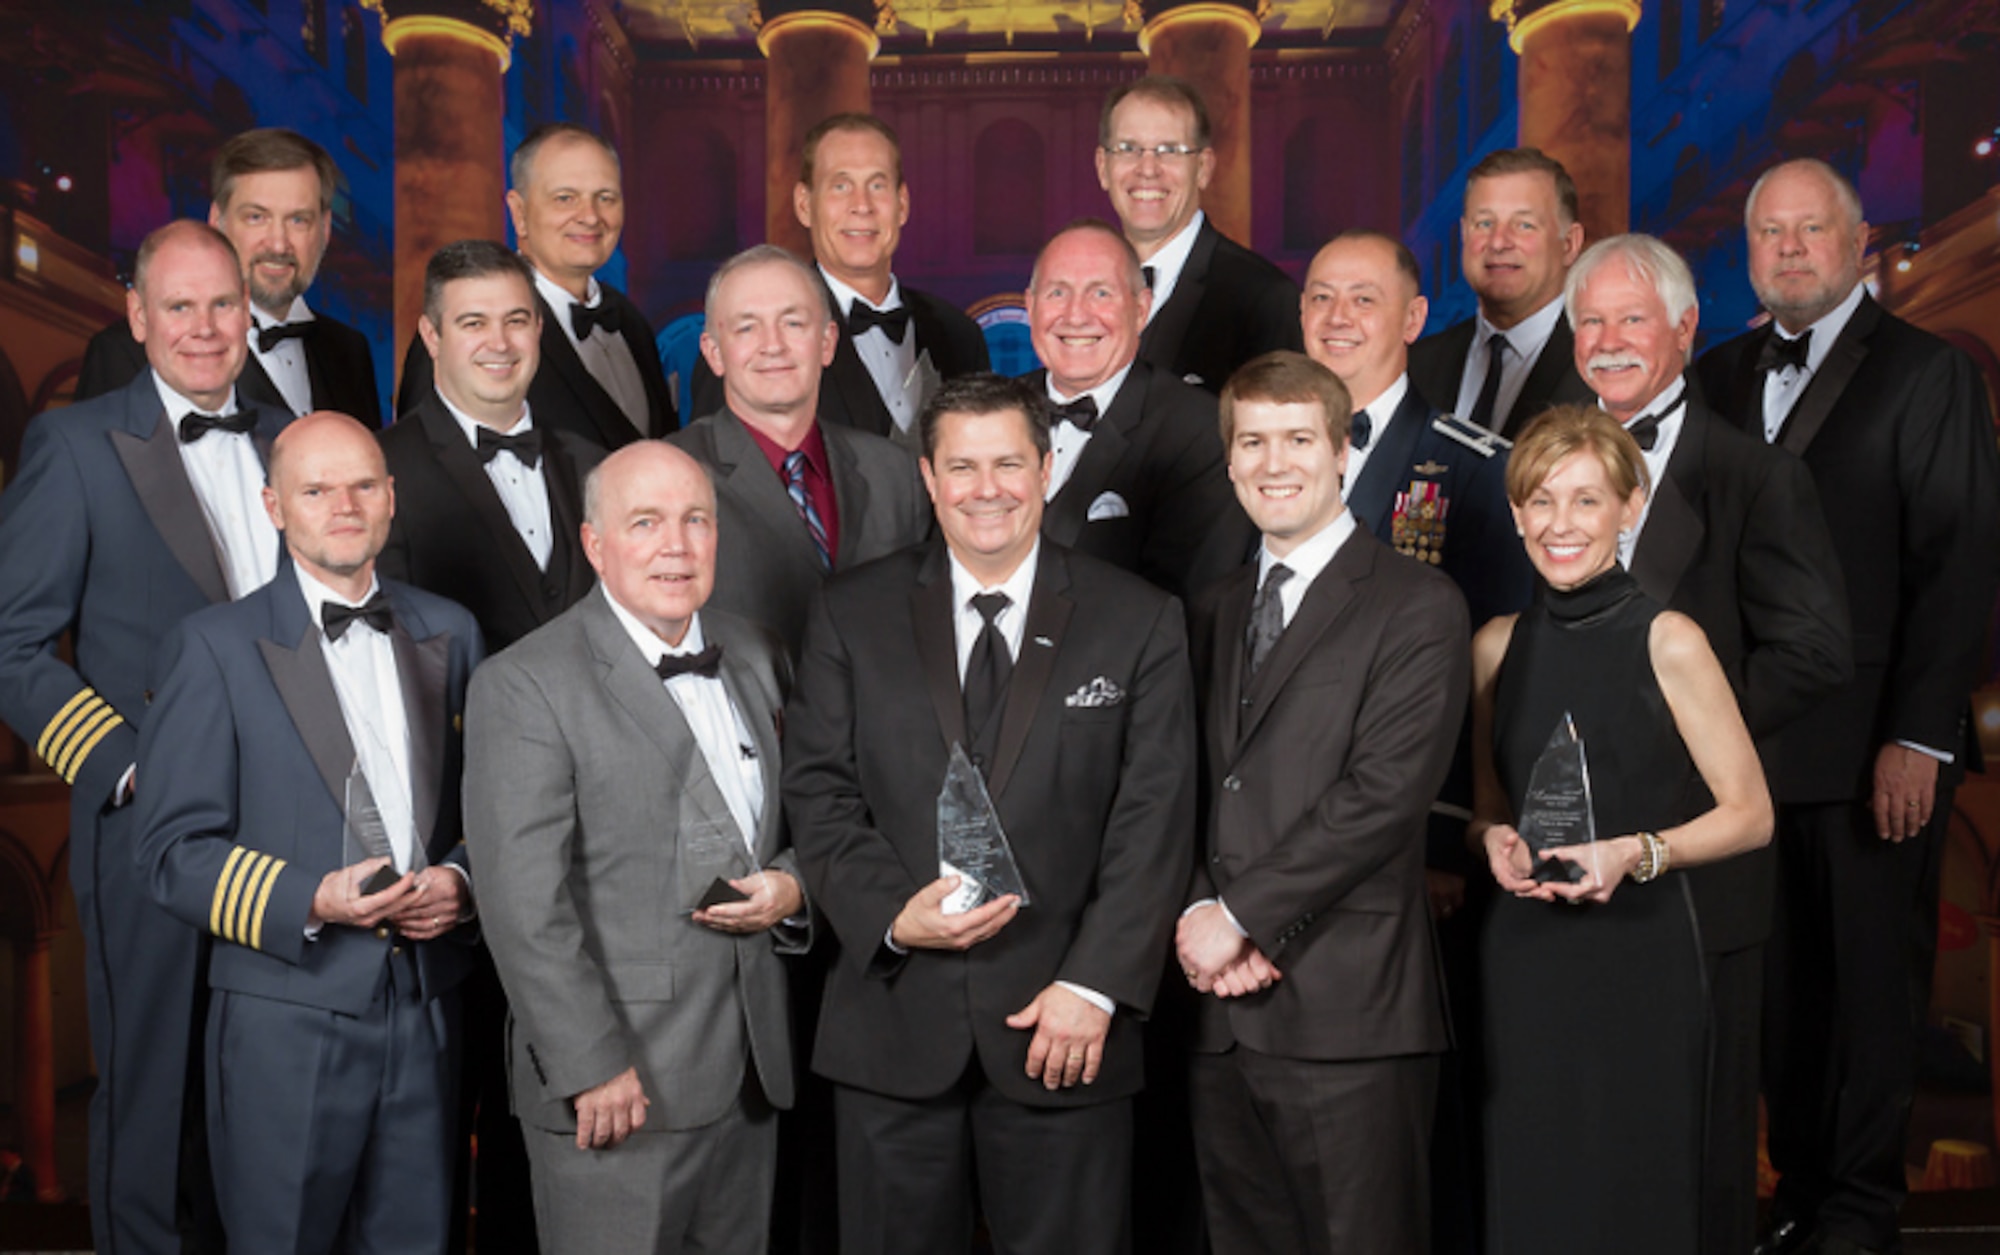 Kevin Price, Air Force Research Laboratory program manager (maroon shirt) stands to the left of Edward Griffin of Lockheed Martin, along with other winners of the 2019 Aviation Week Laureate Awards at a formal ceremony at the National Building Museum in Washington, D.C. March 14, 2019. AFRL, Lockheed Martin and Office of the Secretary of Defense won the safety award in the defense category for Auto-ICAS, a life-saving aircraft technology. (Photo by Chris Zimmer, Aviation Week)